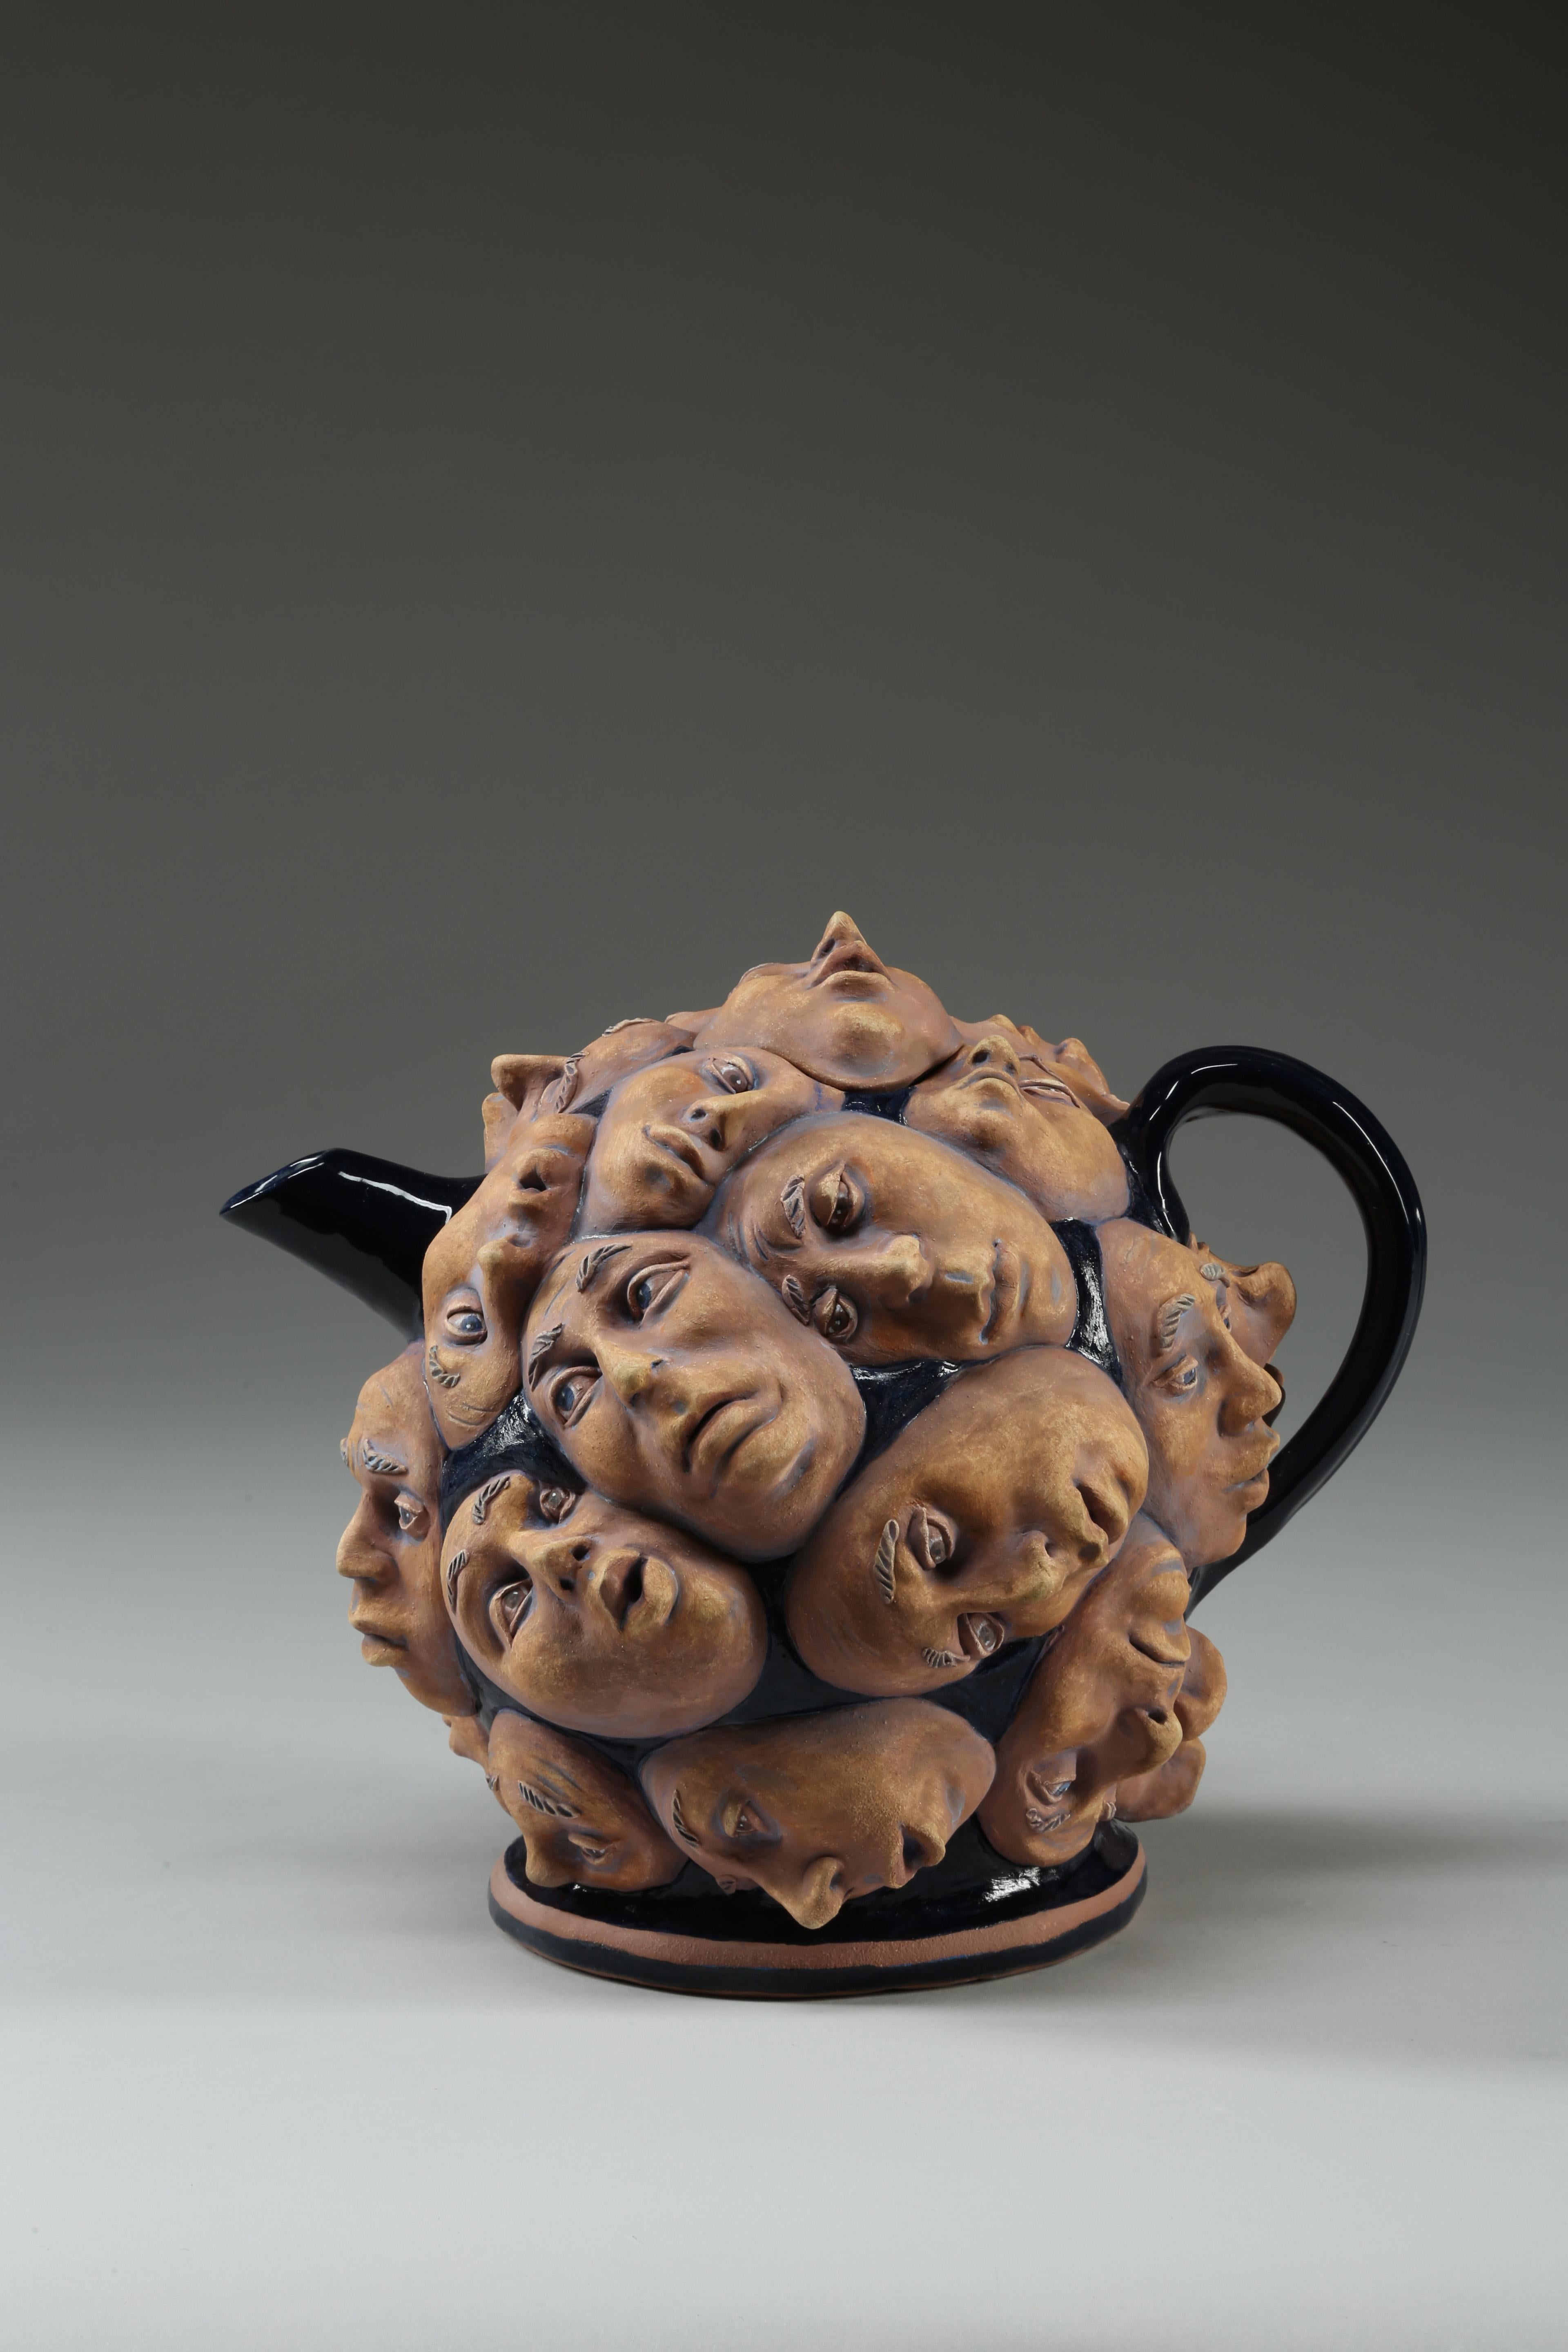 Beverly Mayeri Figurative Sculpture - "Crowded Teapot", Contemporary, Ceramic, Sculpture, Functional, Acrylic Pigment